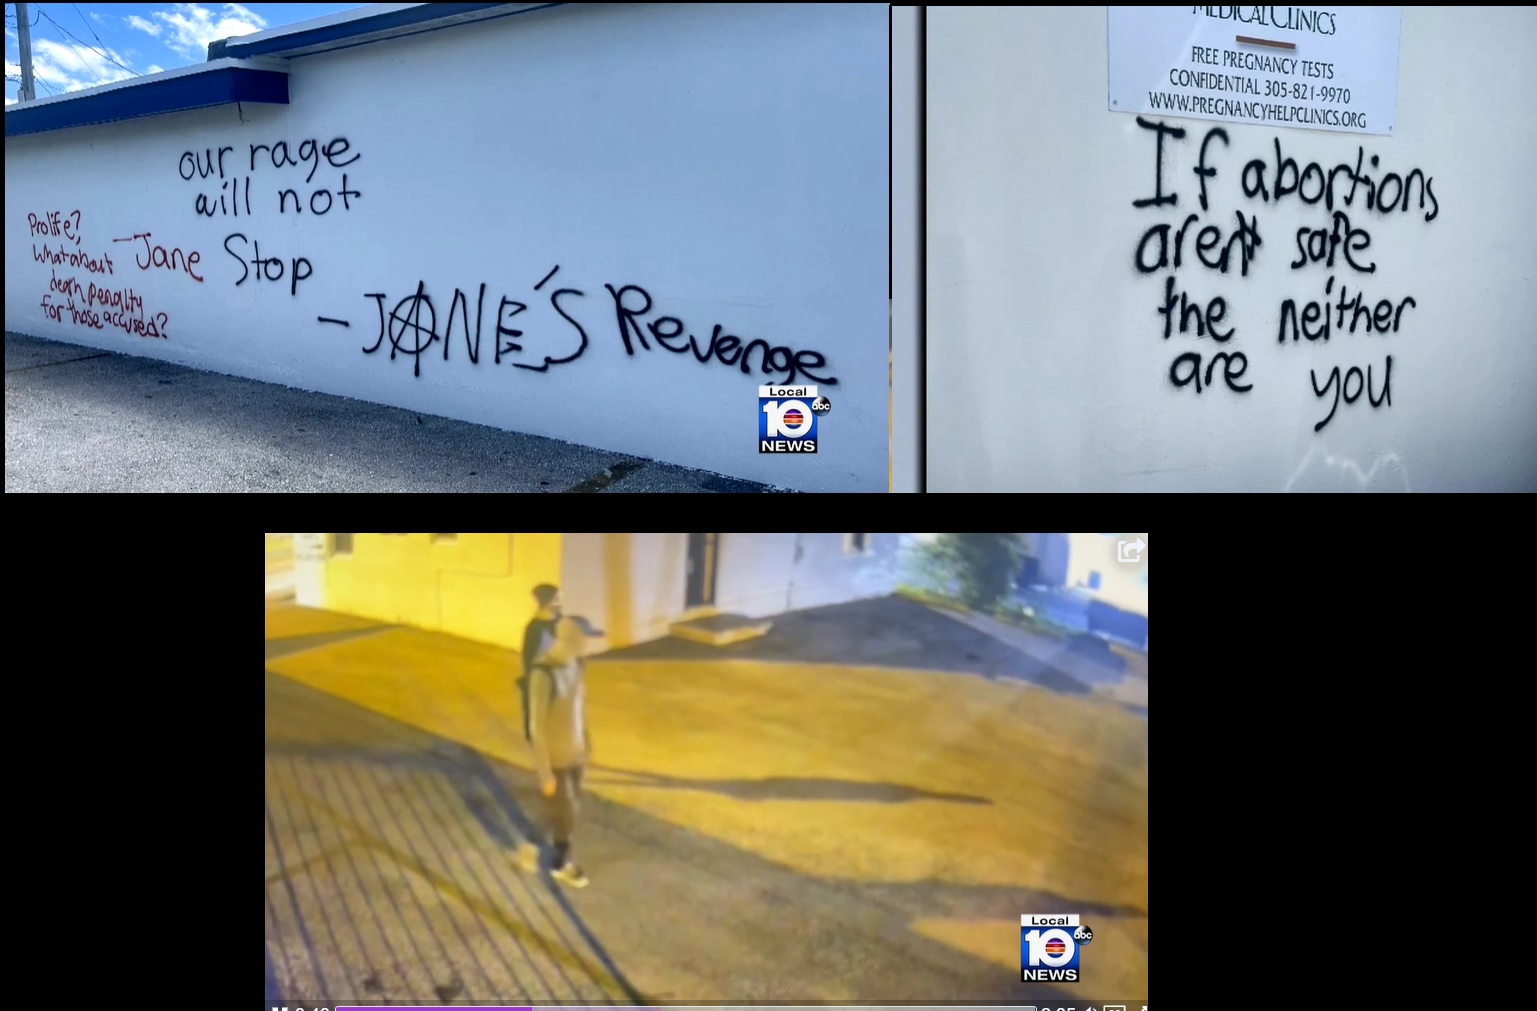 Image: Heartbeat of Miami pregnancy center in Hialeah FL vandalized with Janes Revenge messages, abortion